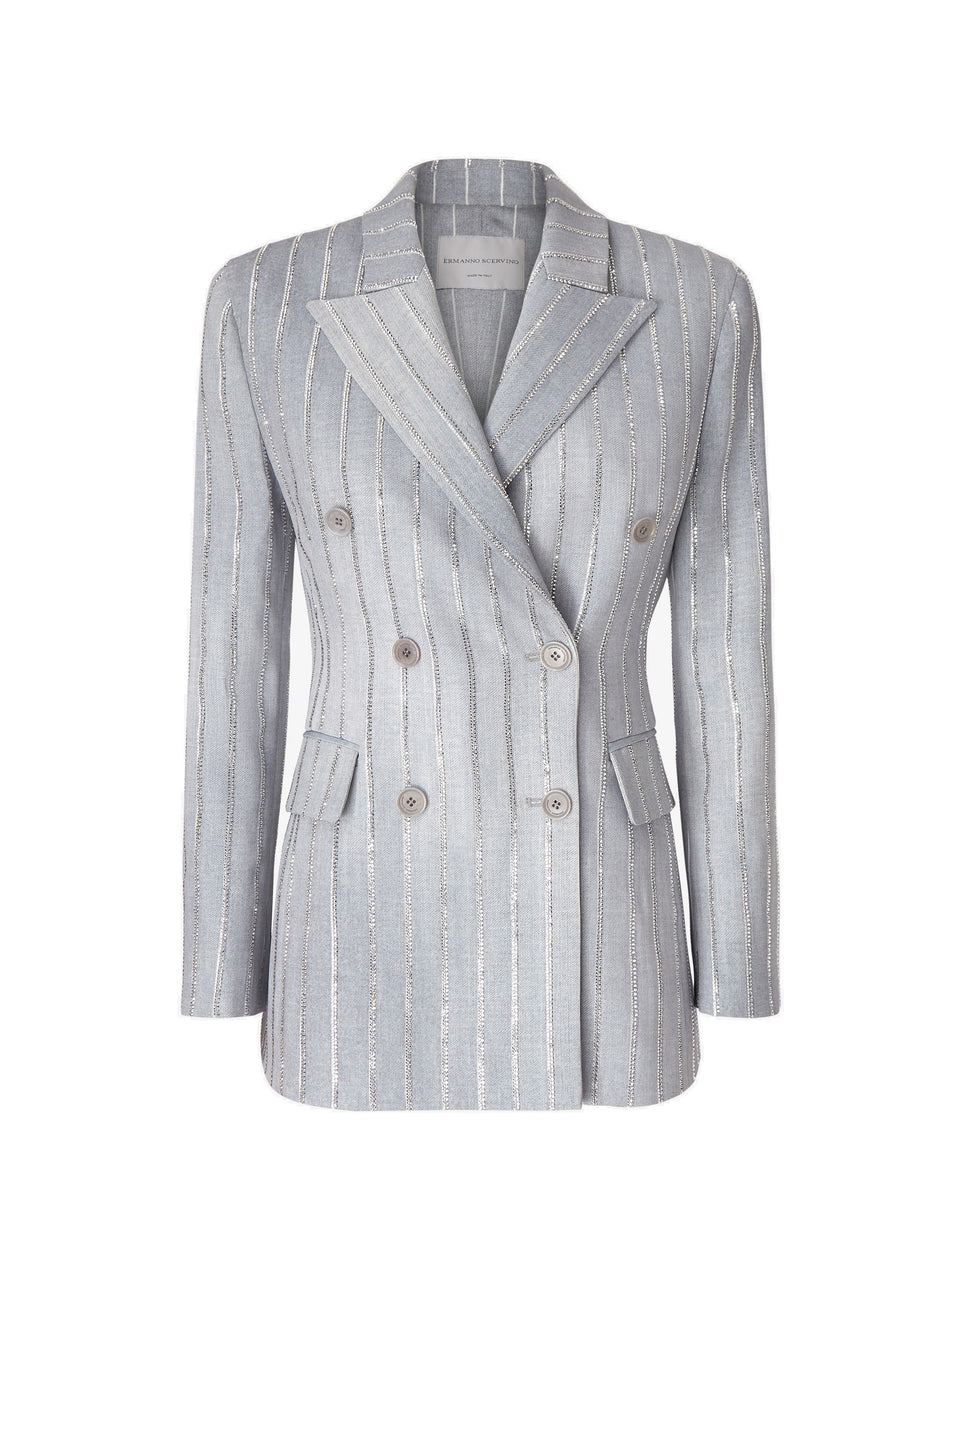 Striped jacket in silver fabric